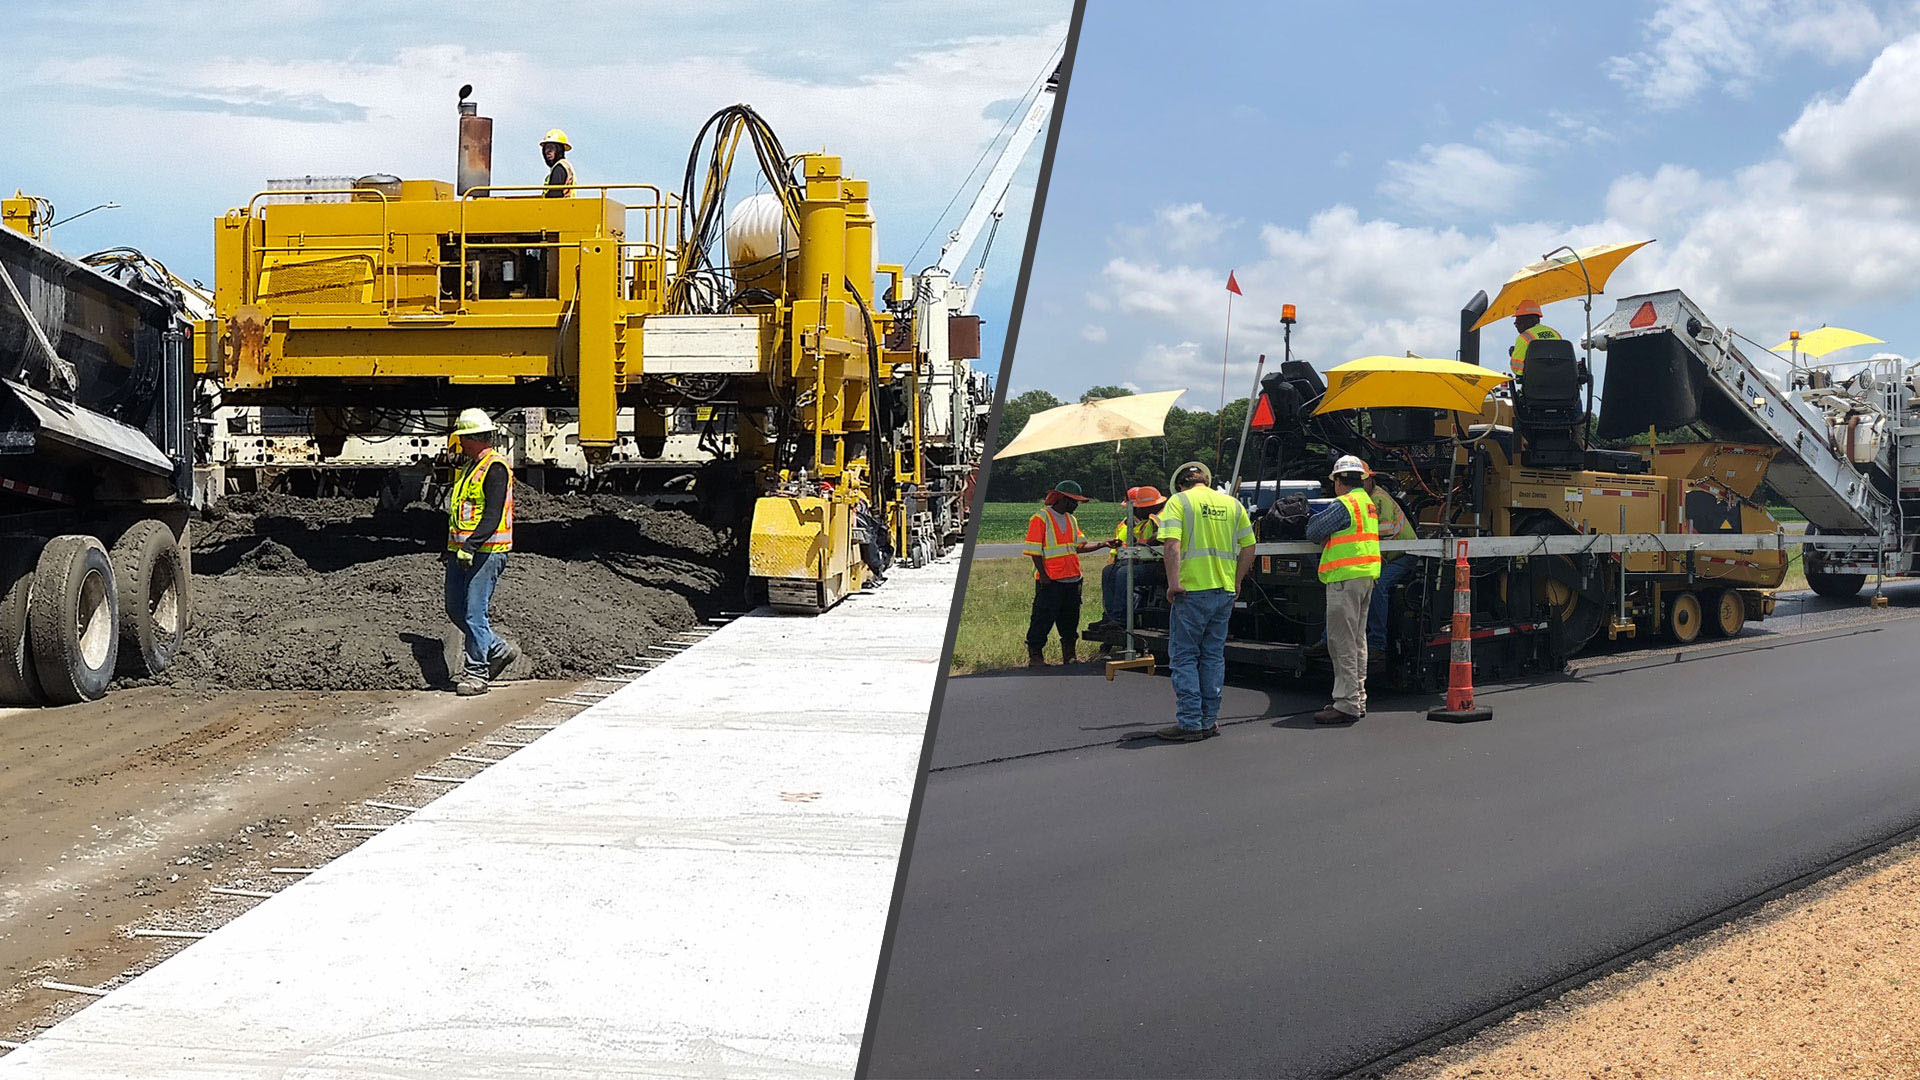 A construction worker in the picture on the left stands near a concrete paver and a pile of new cement. Four construction workers stand near an asphalt paver and atop new asphalt in the picture on the right.